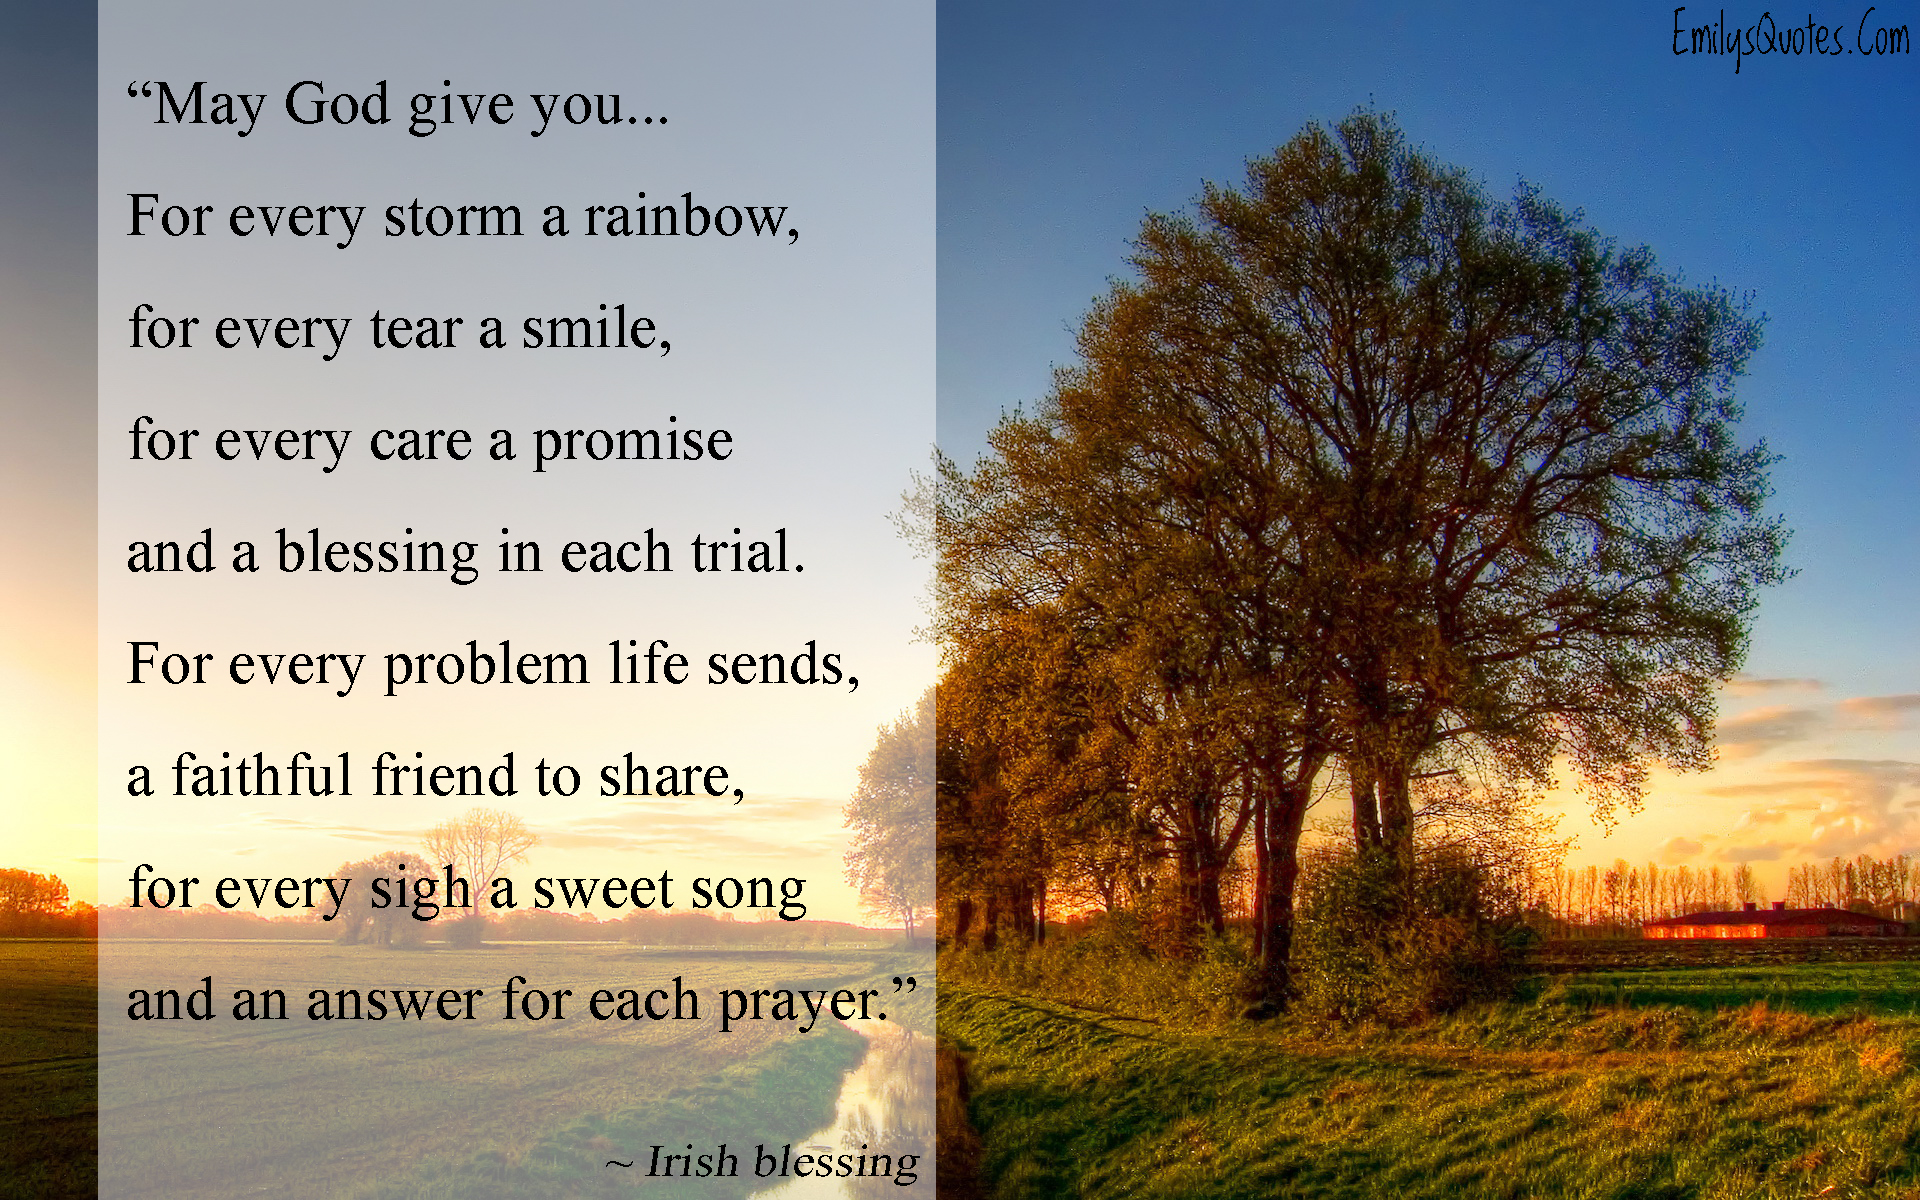 May God give you… For every storm a rainbow,  for every tear a smile,  for every care a promise  and a blessing in each trial.  For every problem life sends,  a faithful friend to share,  for every sigh a sweet song  and an answer for each prayer